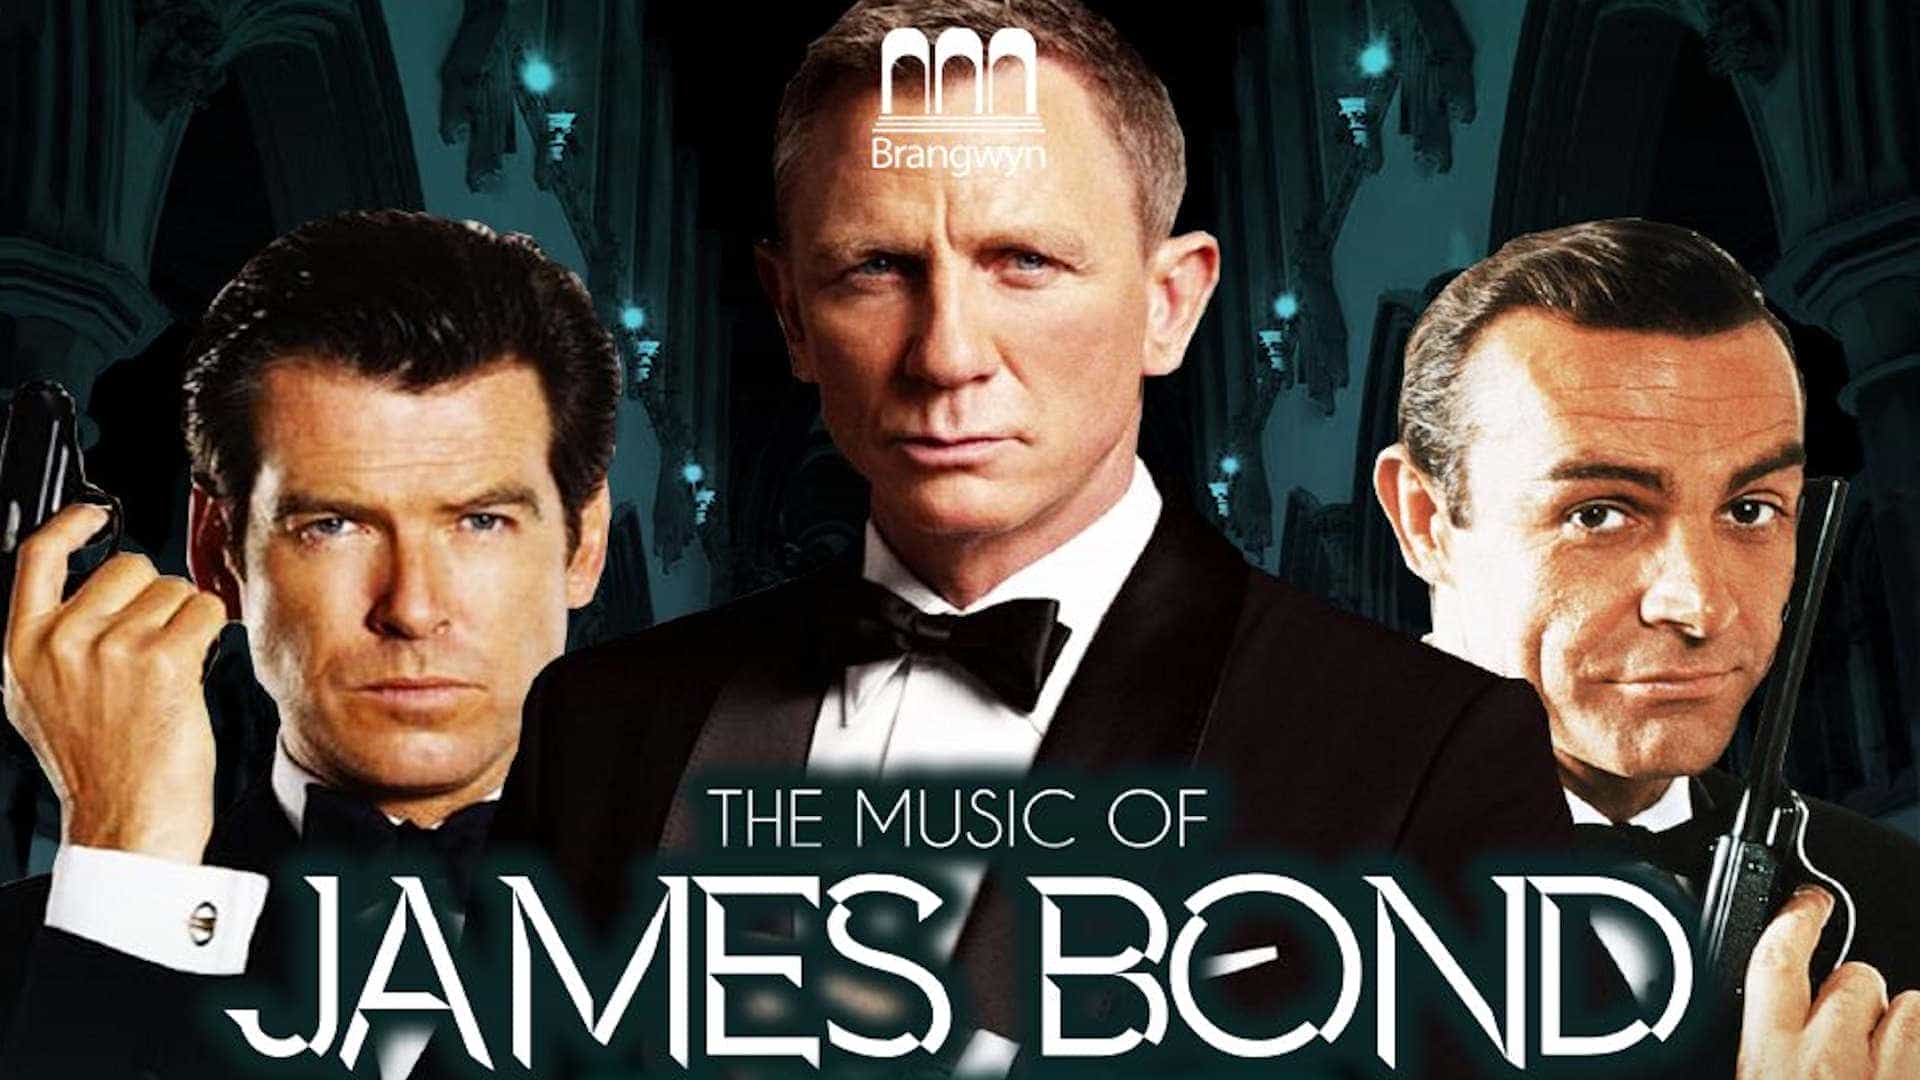 The Music of James Bond by Candlelight